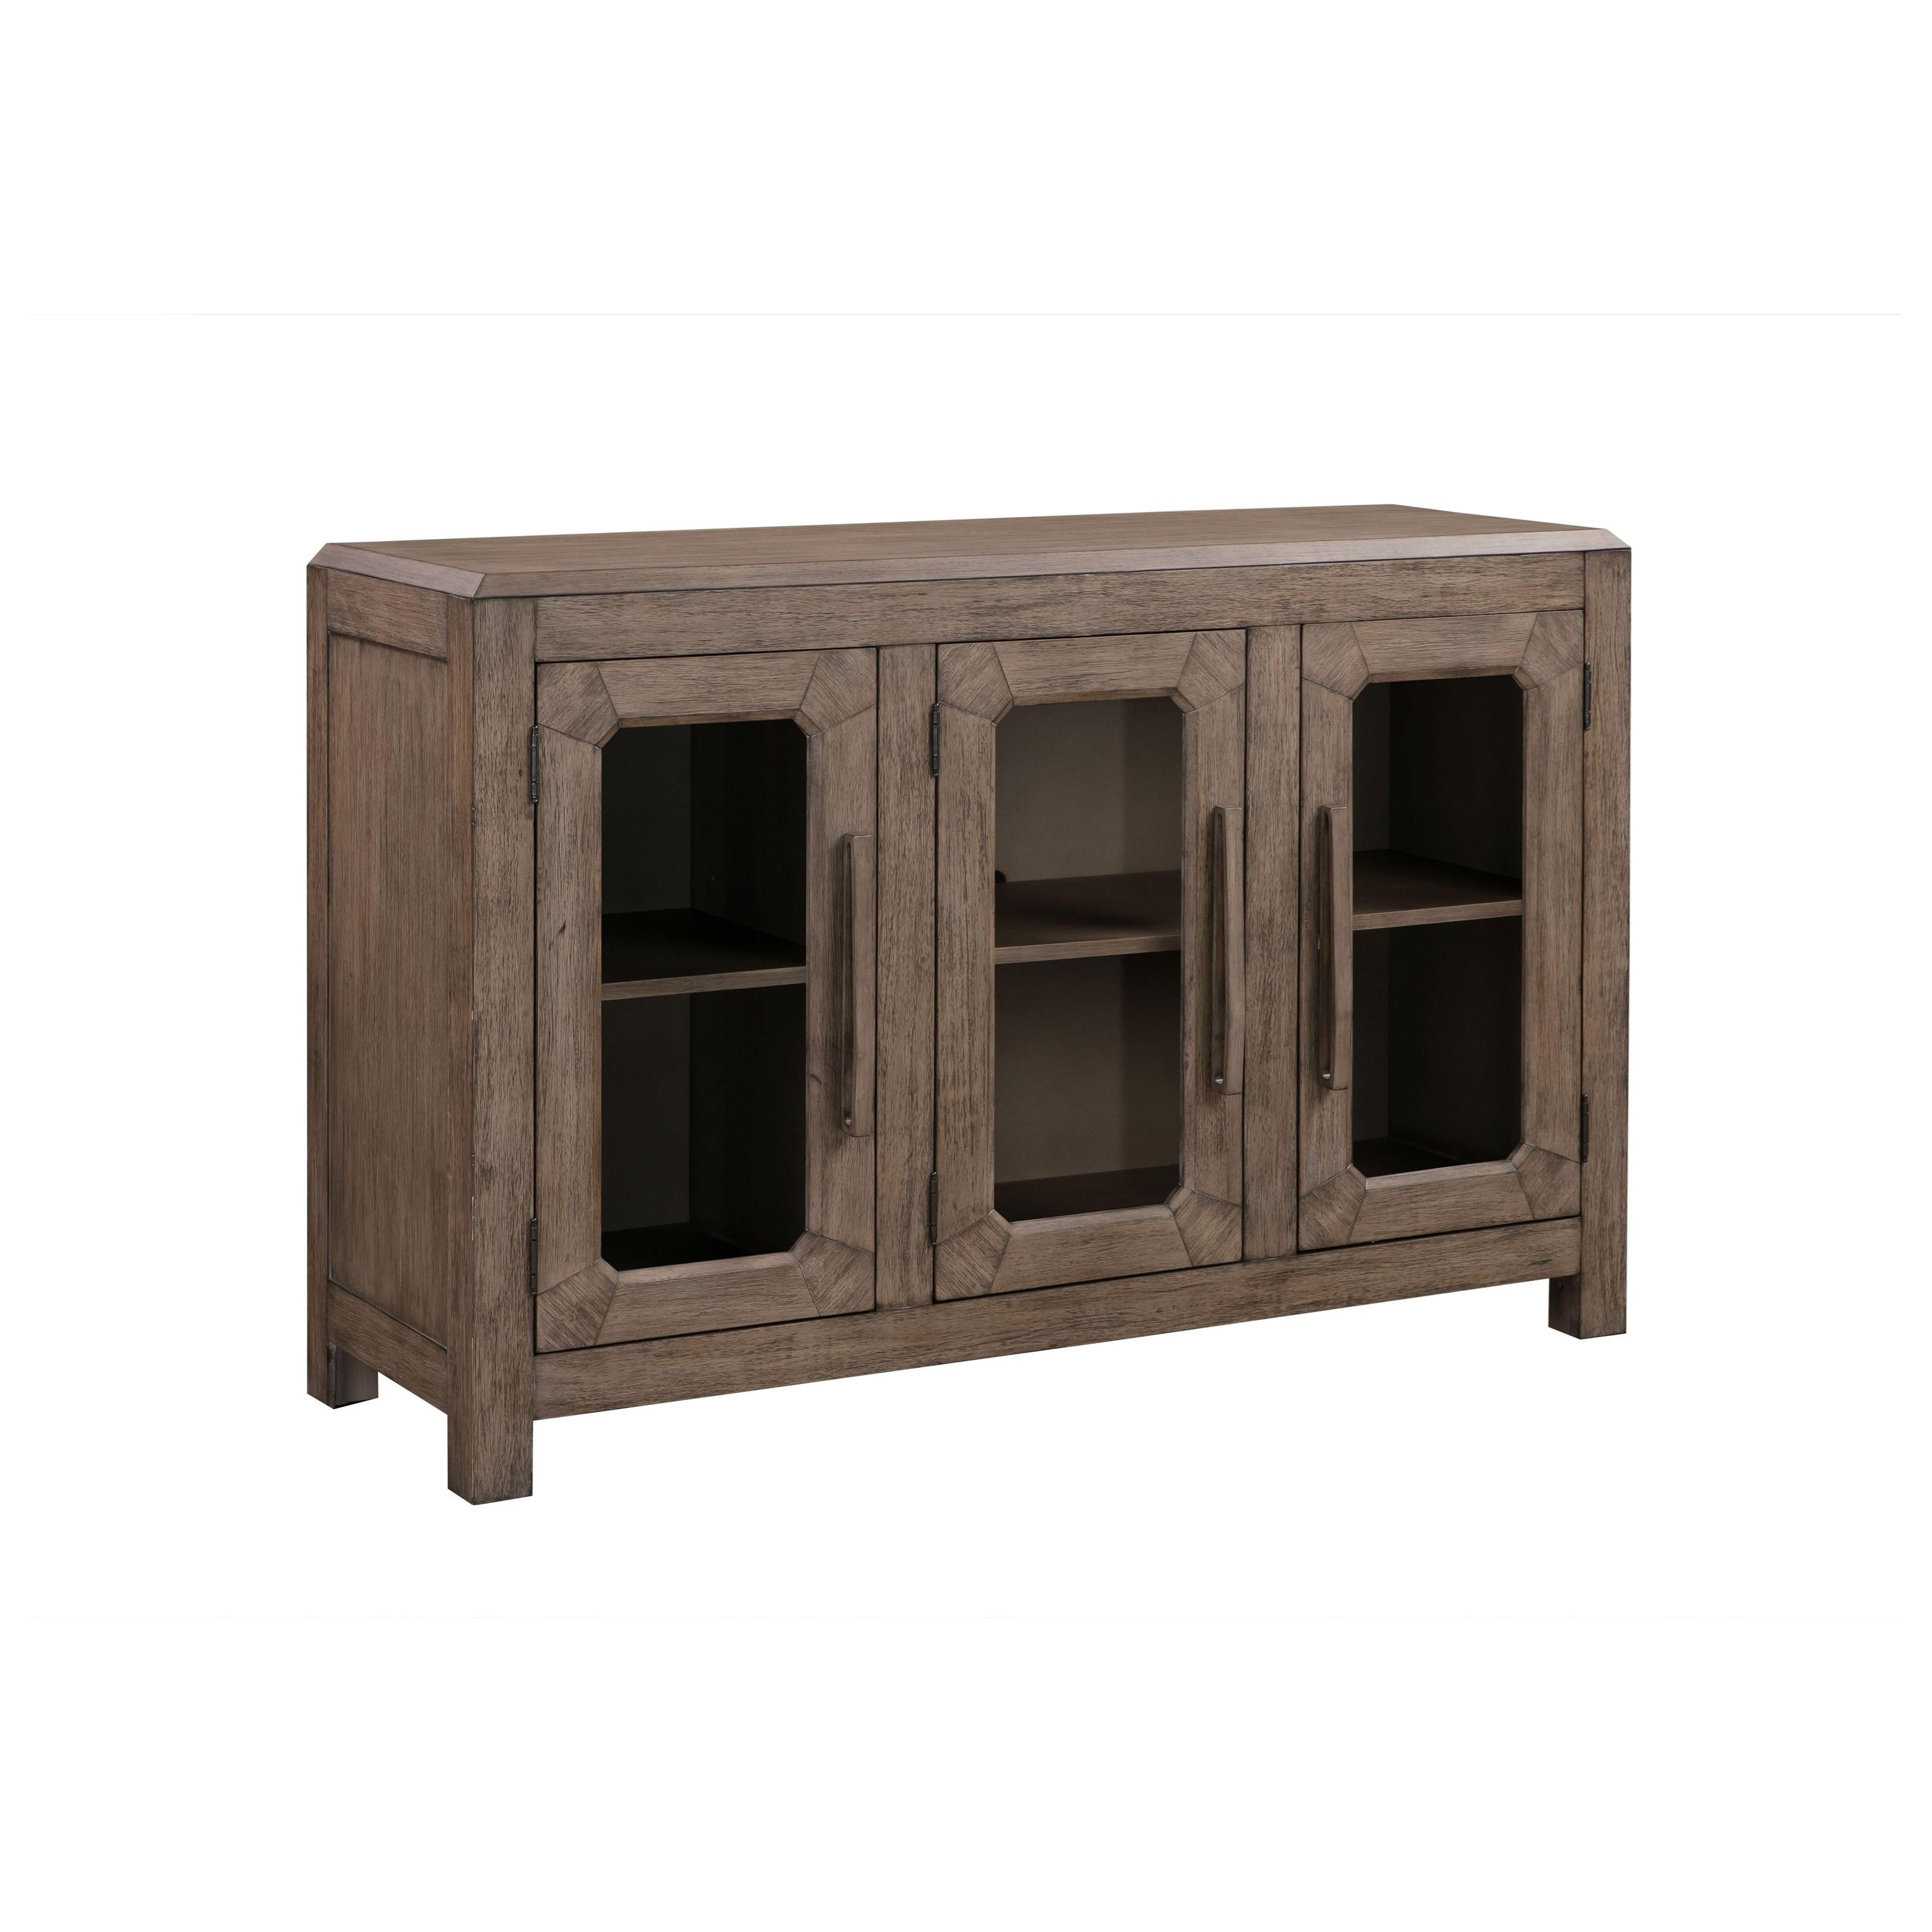 Transitional Sideboard ACADIA GHCL78 in Toffee 